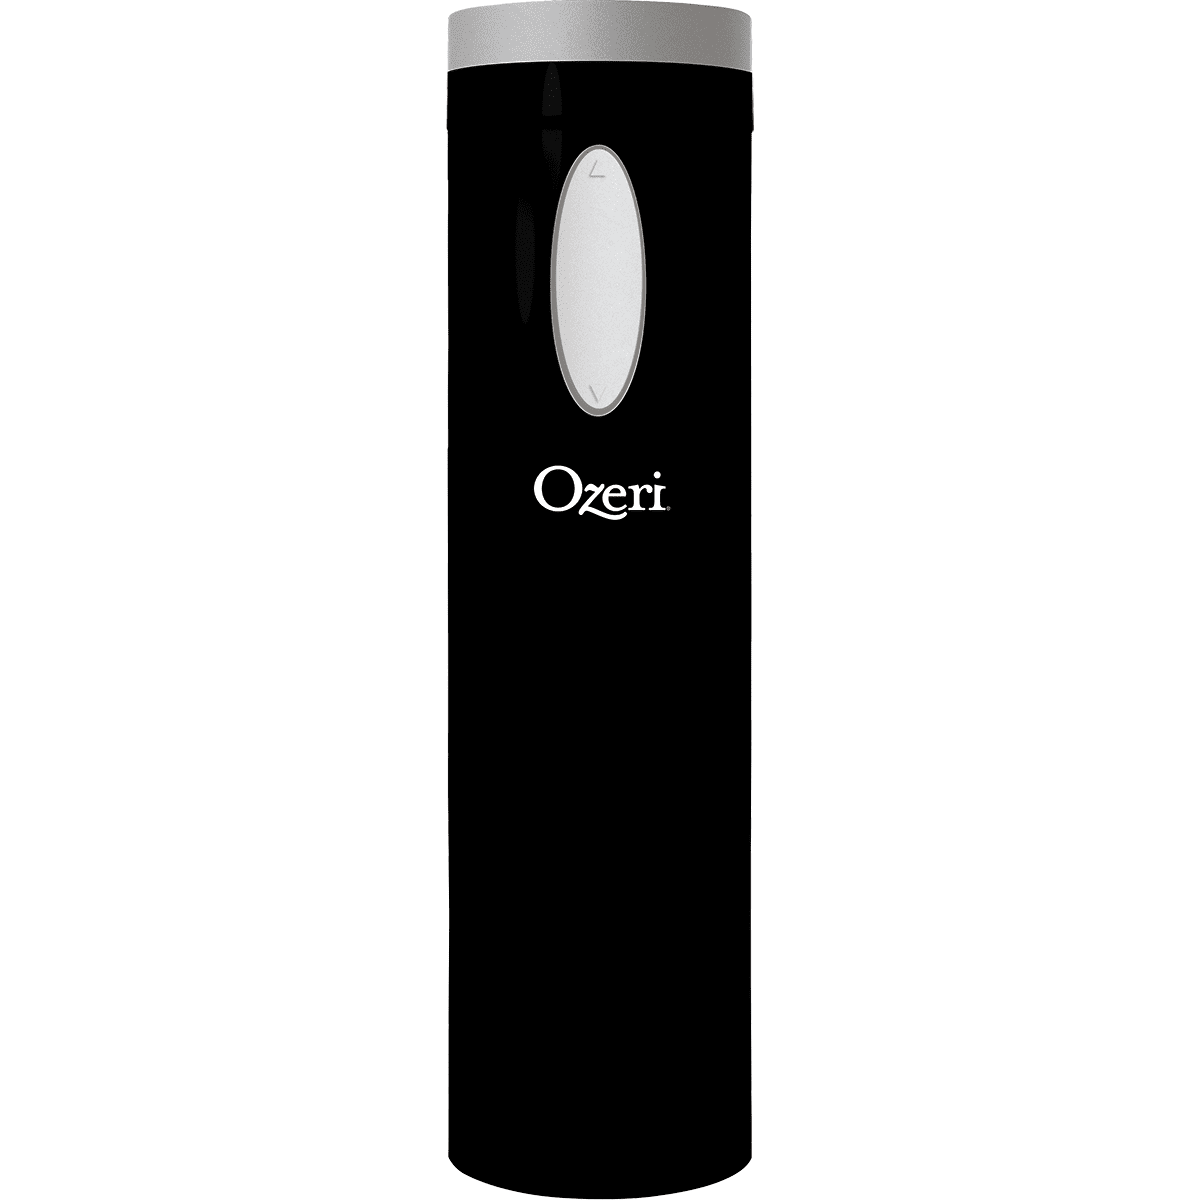 Ozeri Fascina Electric Wine Bottle Opener And Corkscrew (ow08a)